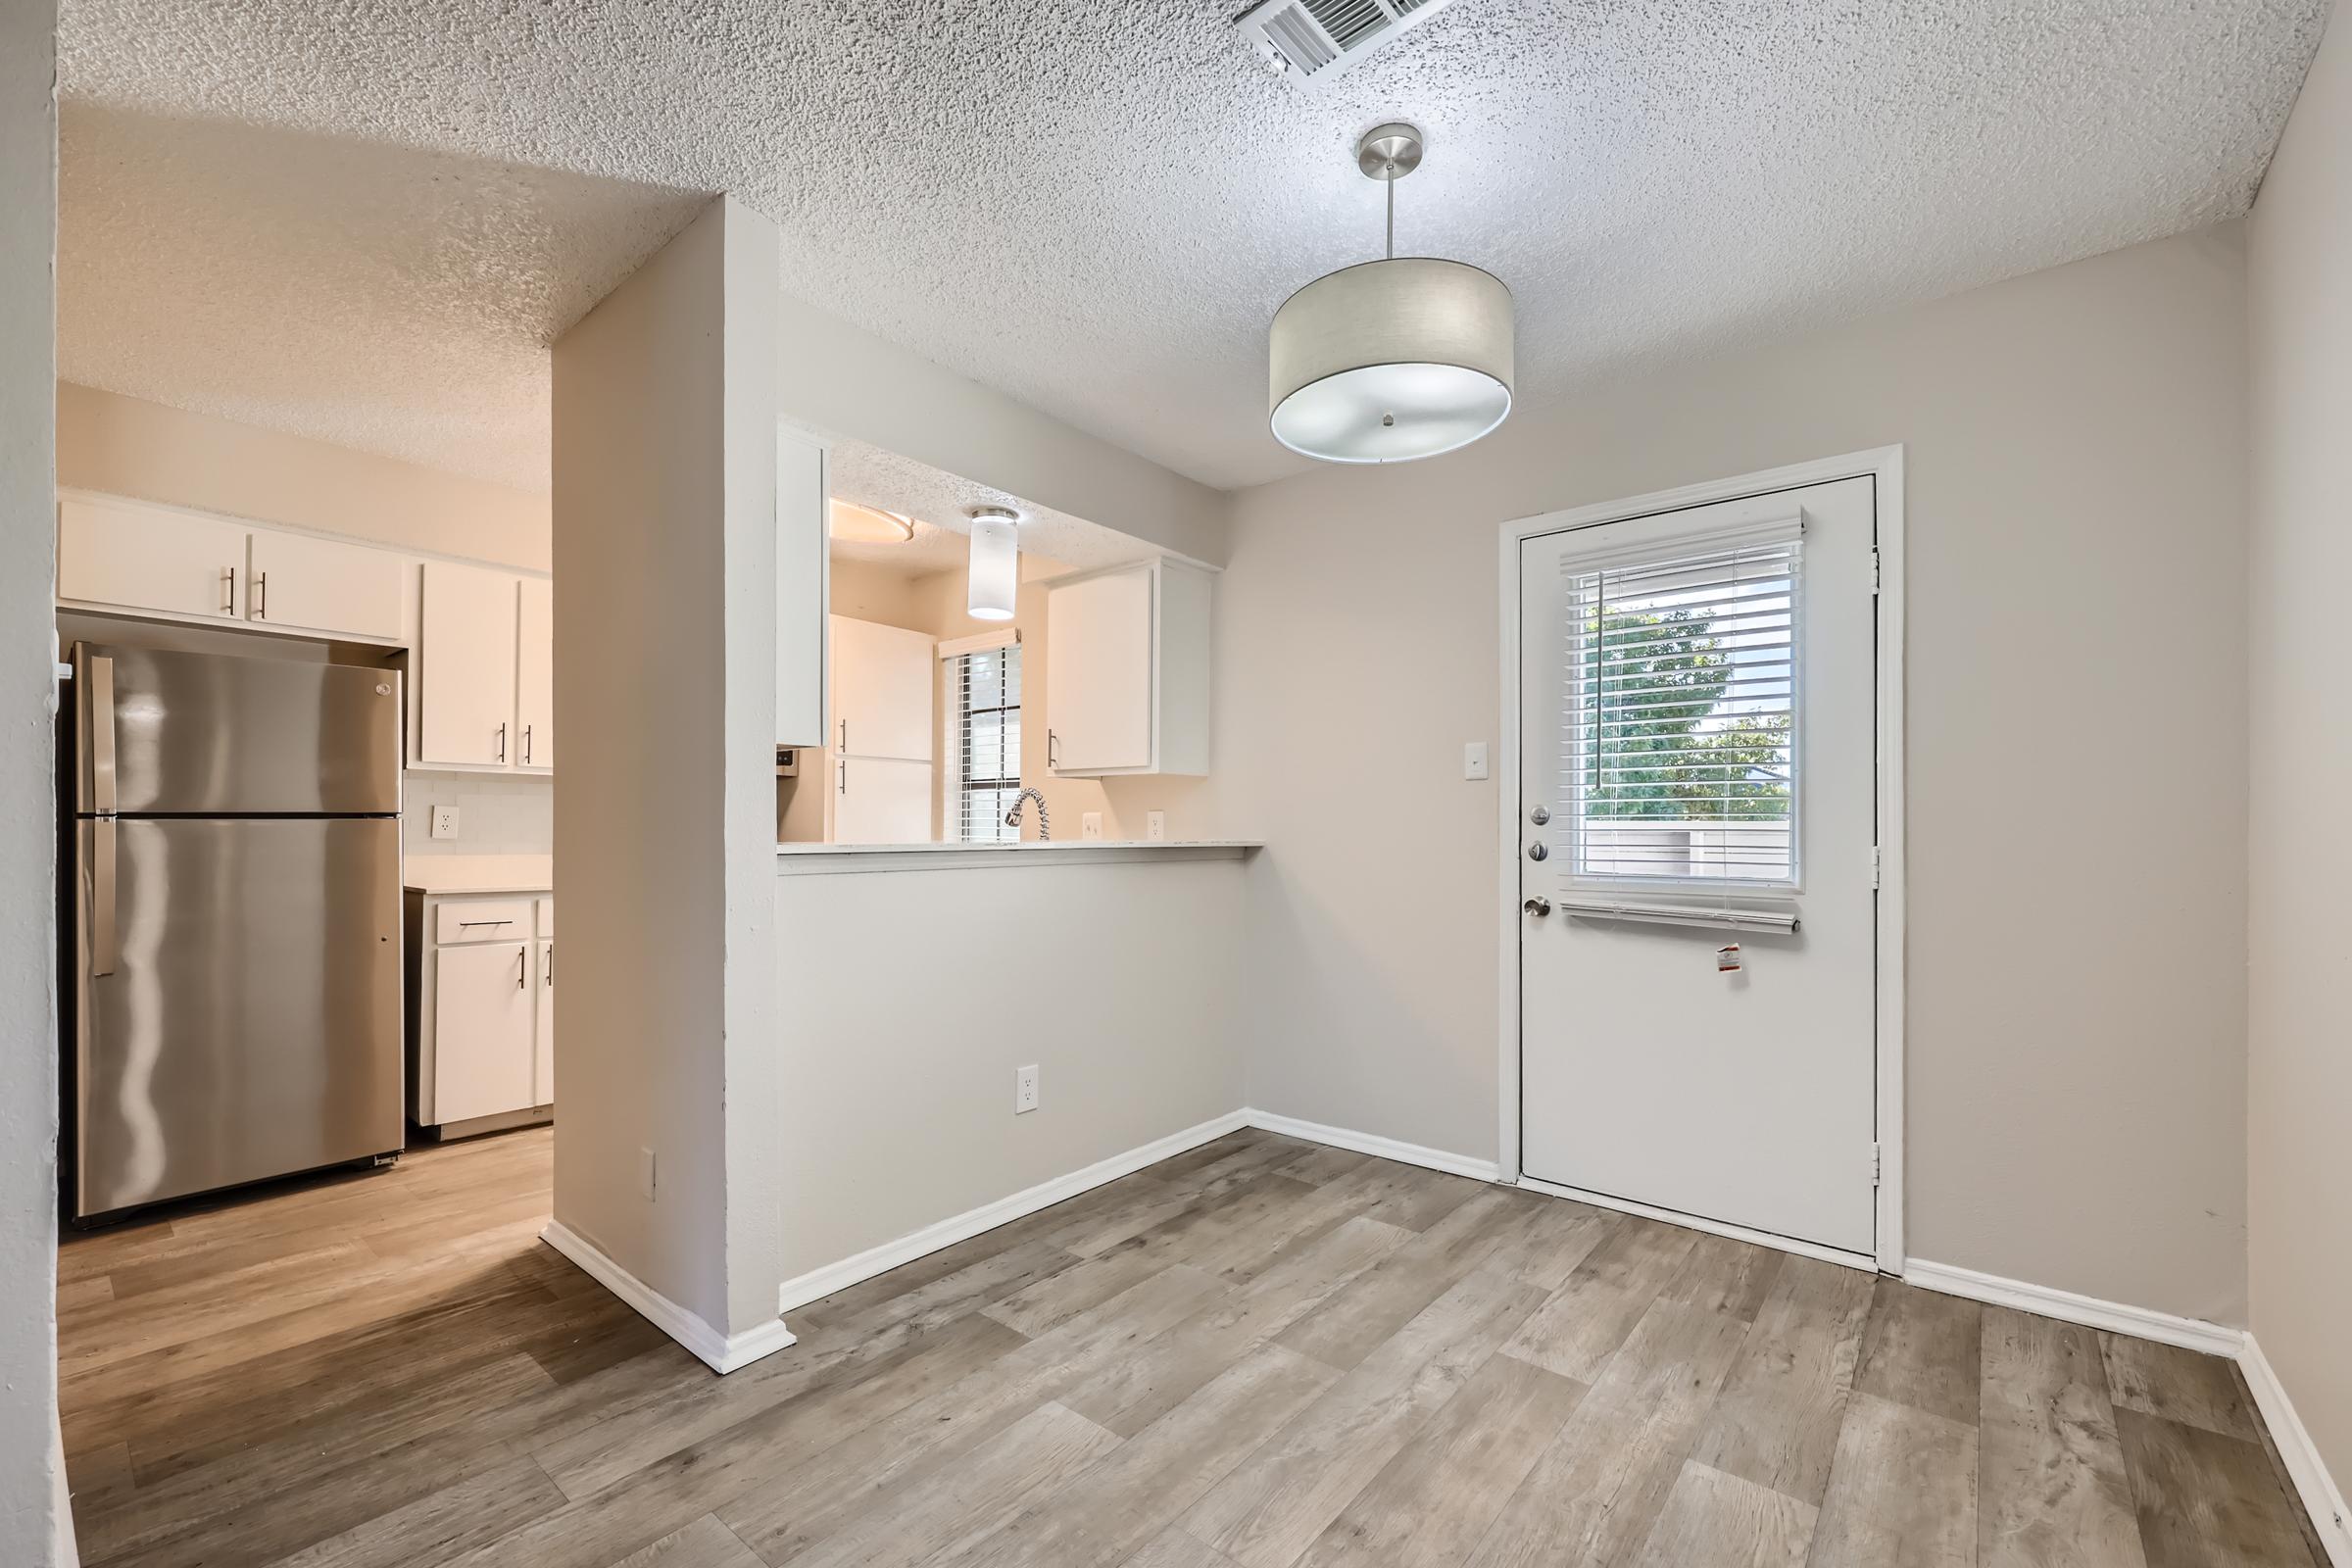 The rear entry into the apartment dining area next to a kitchen at Rise Oak Creek.